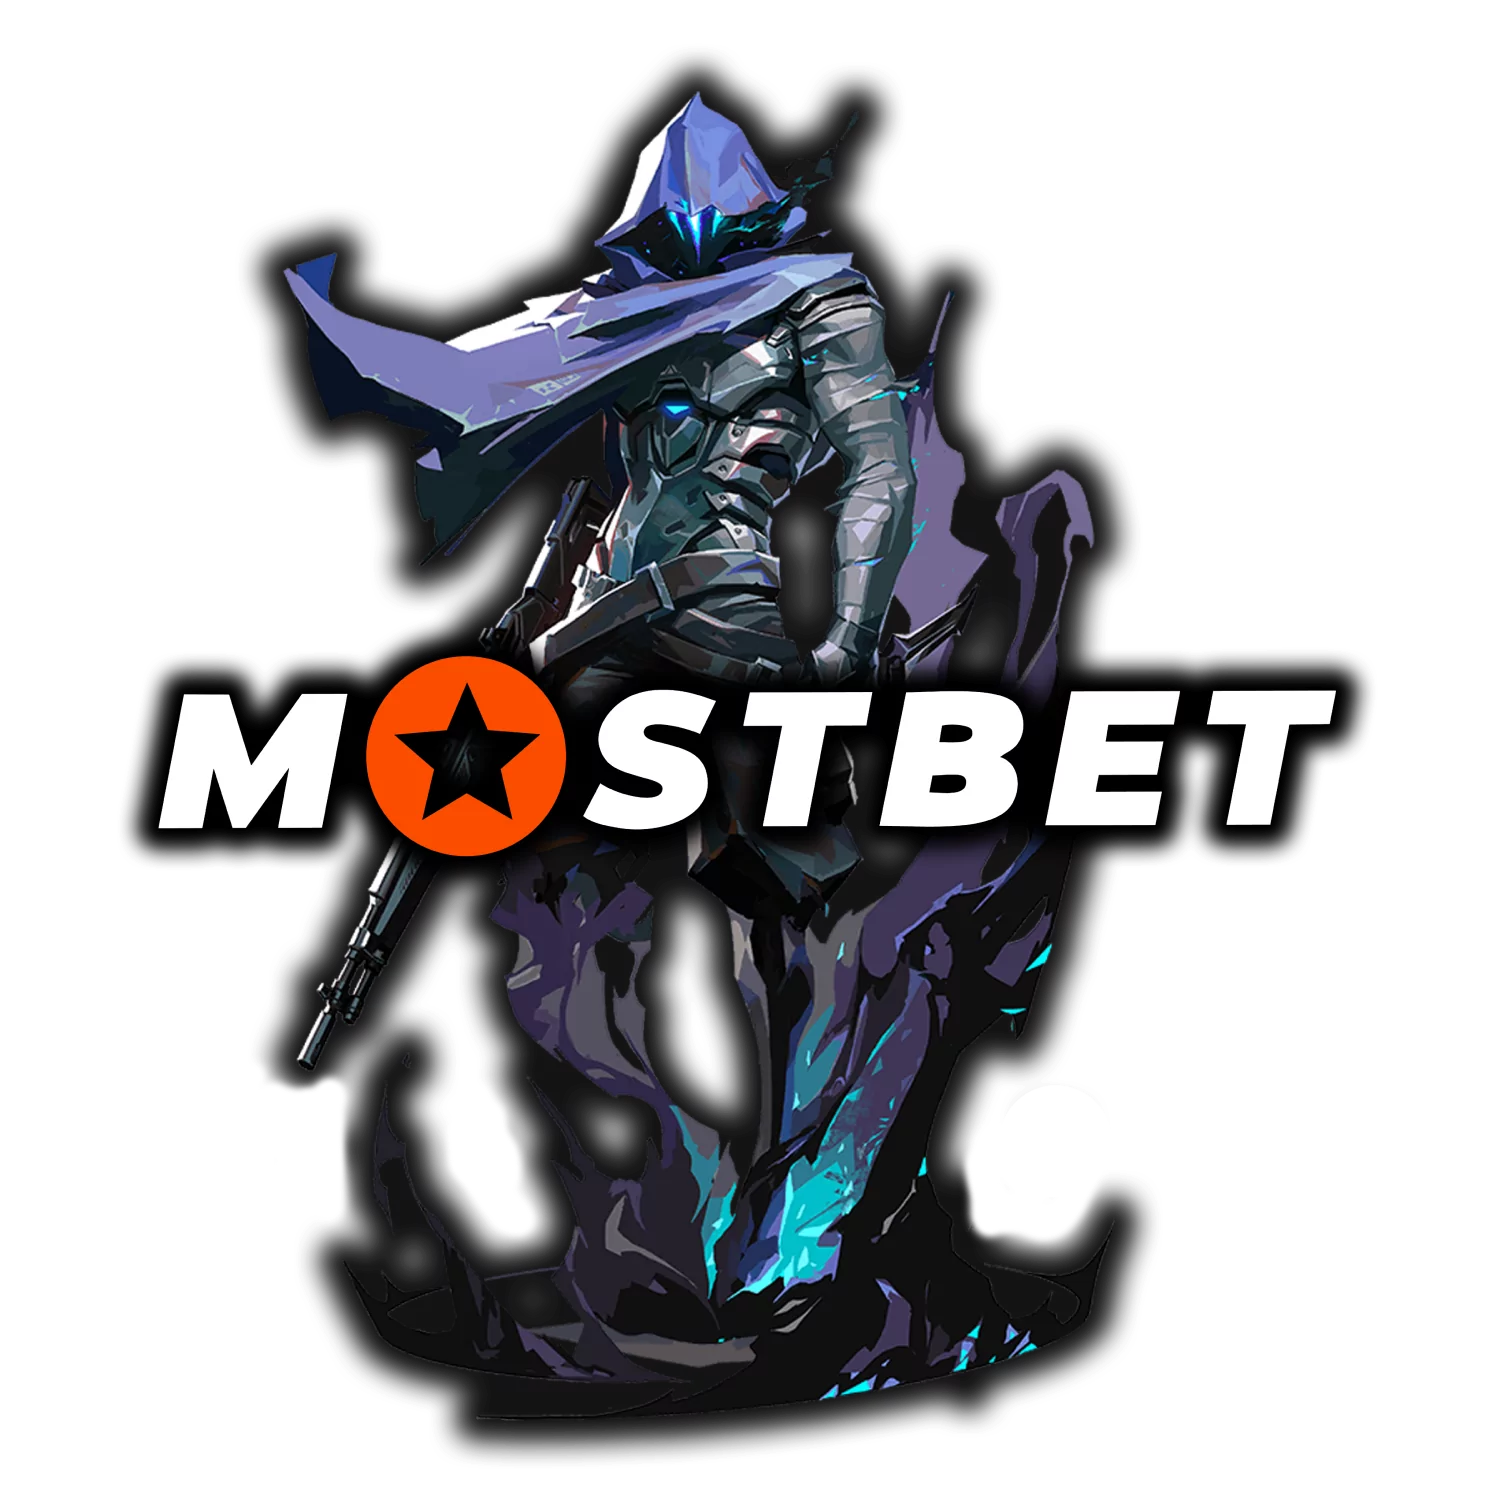 At Mostbet, bet on Valorant matches.